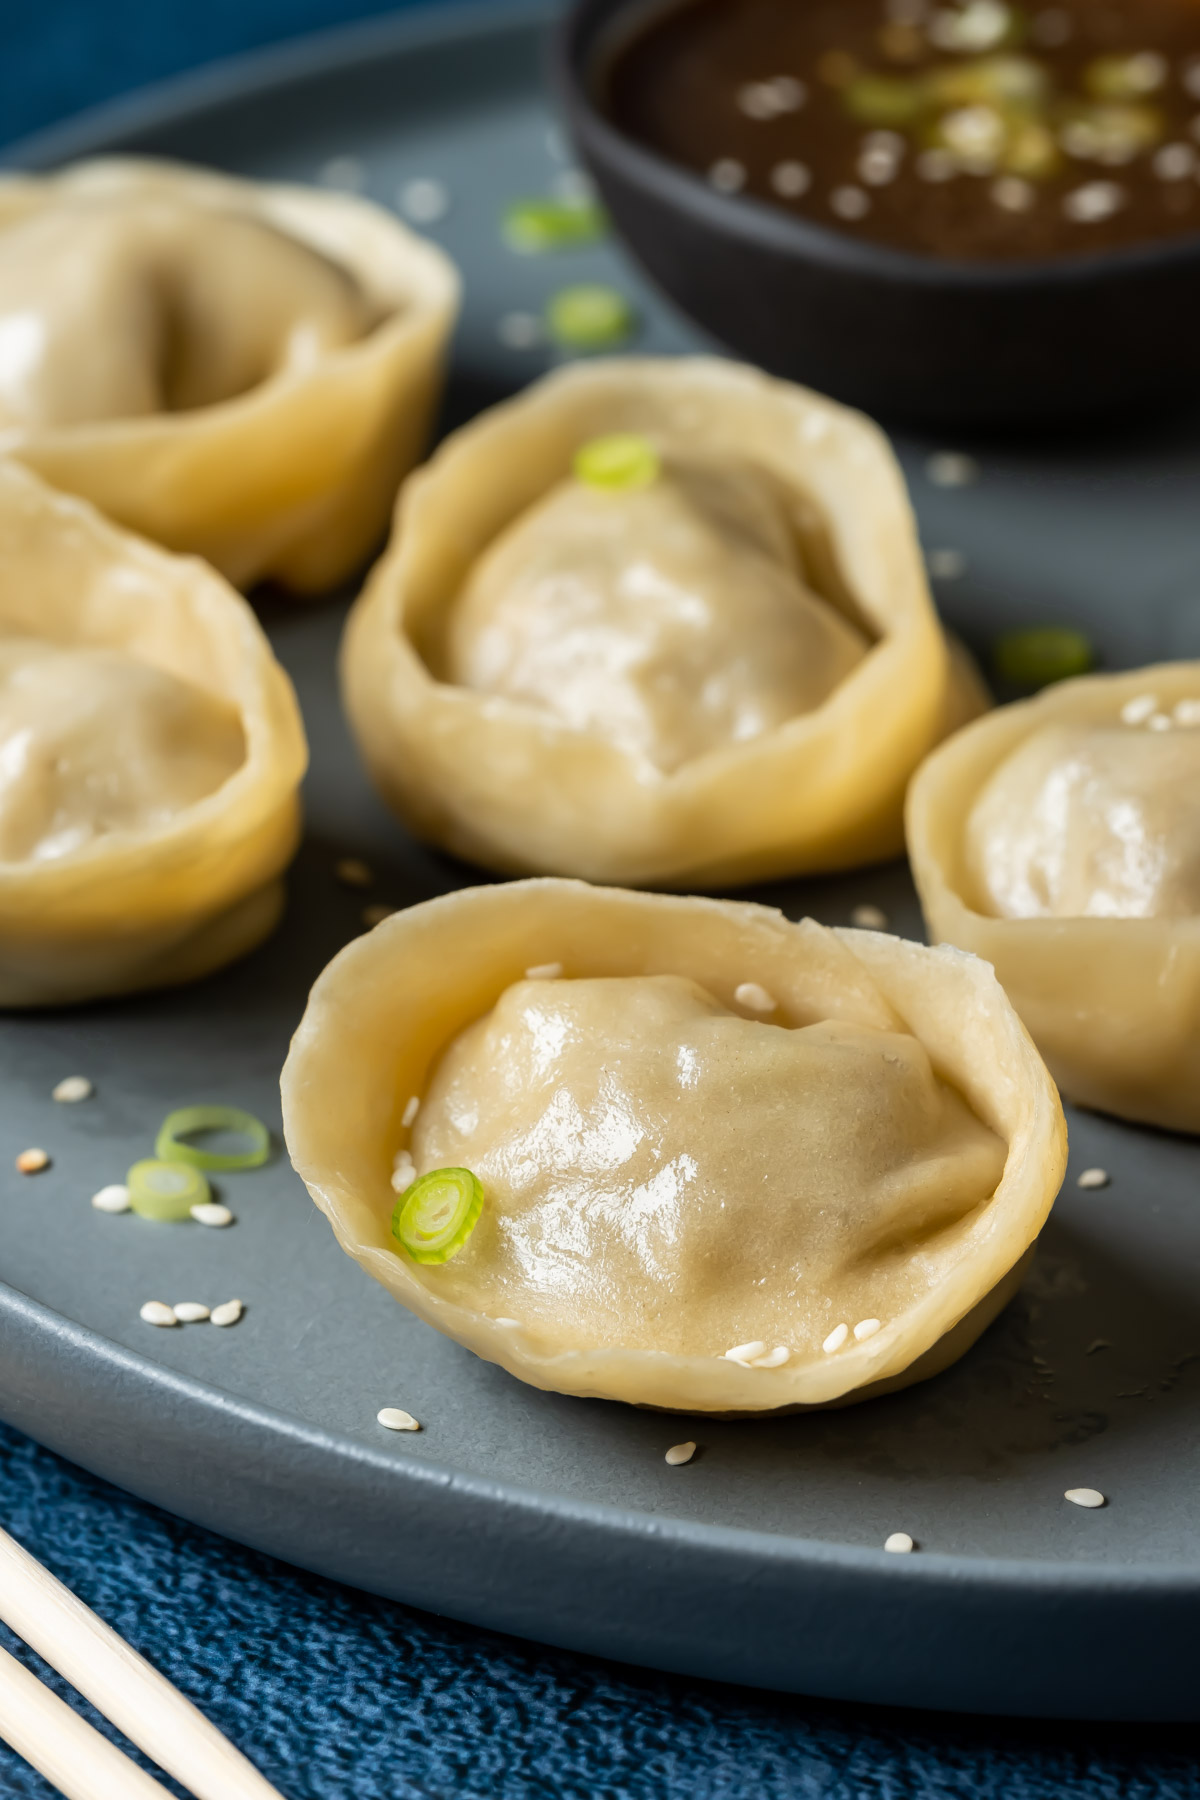 Dumplings on a plate with chopped green onions.